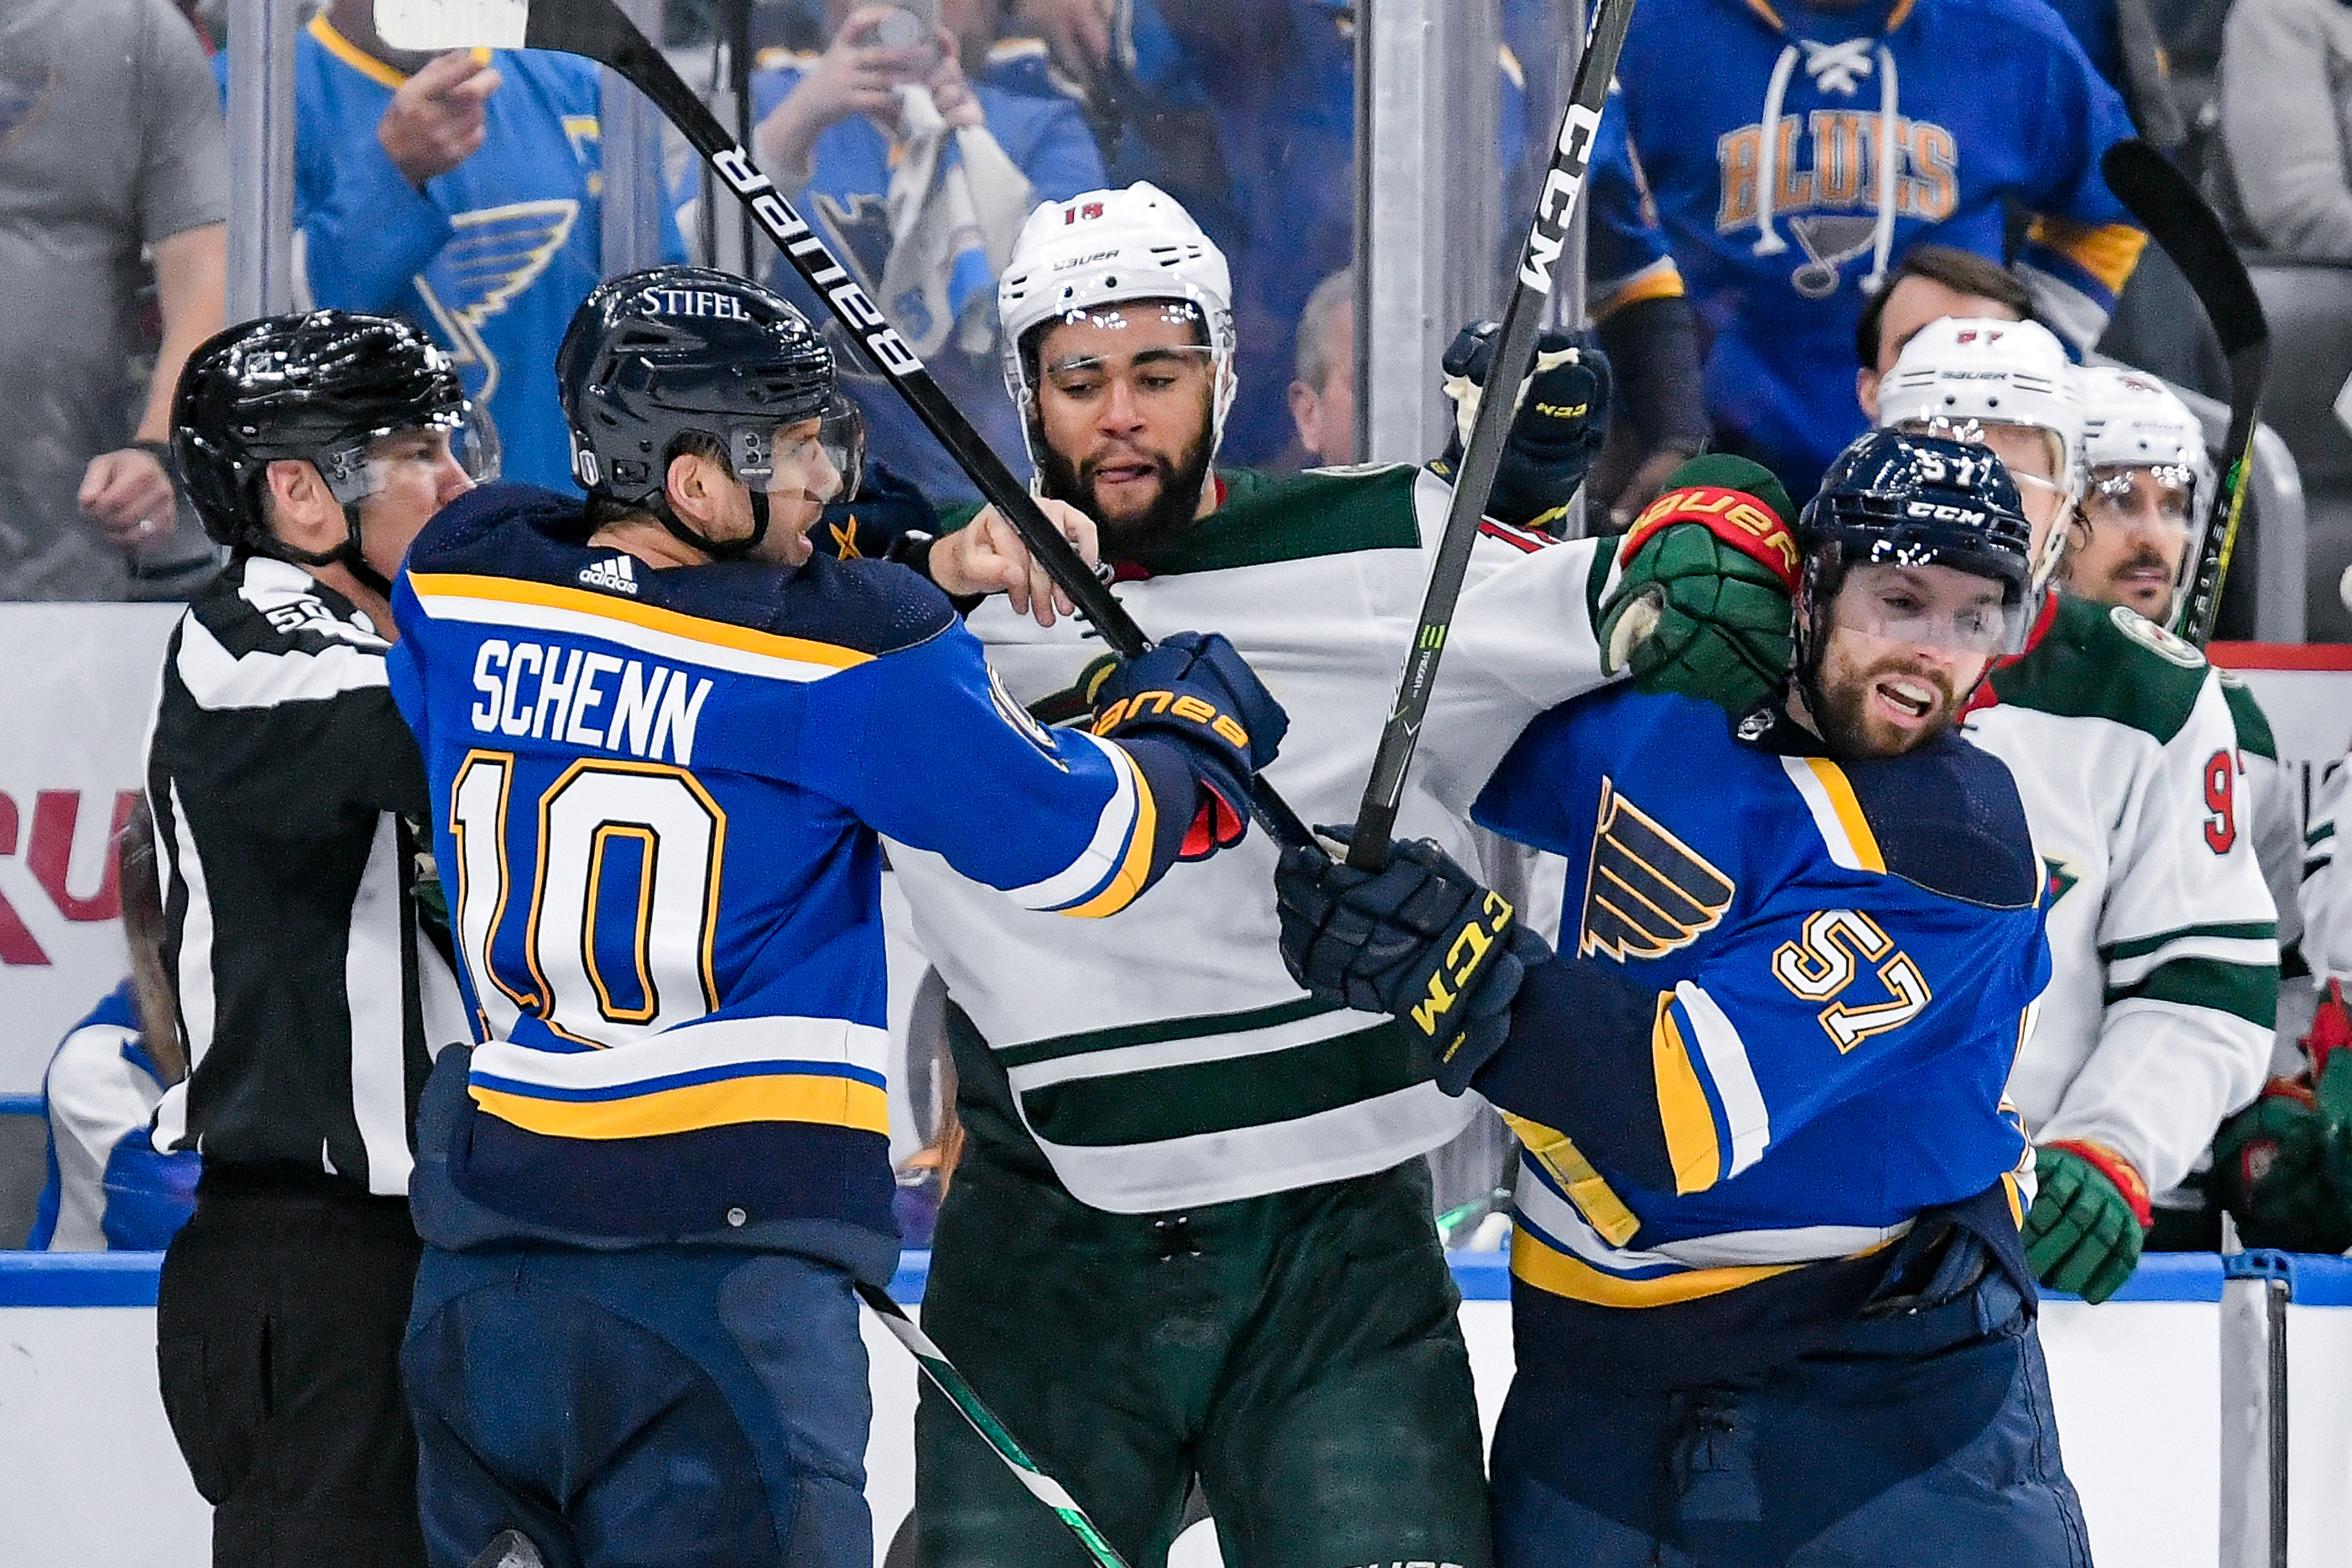 St. Louis Blues center Brayden Schenn (10) and St. Louis Blues left wing David Perron (57) push and shove with Minnesota Wild left wing Jordan Greenway (18) during Round 1 game 4 of the Stanley Cup Playoffs between the Minnesota Wild and the St. Louis Blues on April 29, 2022, at the Enterprise Center in St. Louis MO.